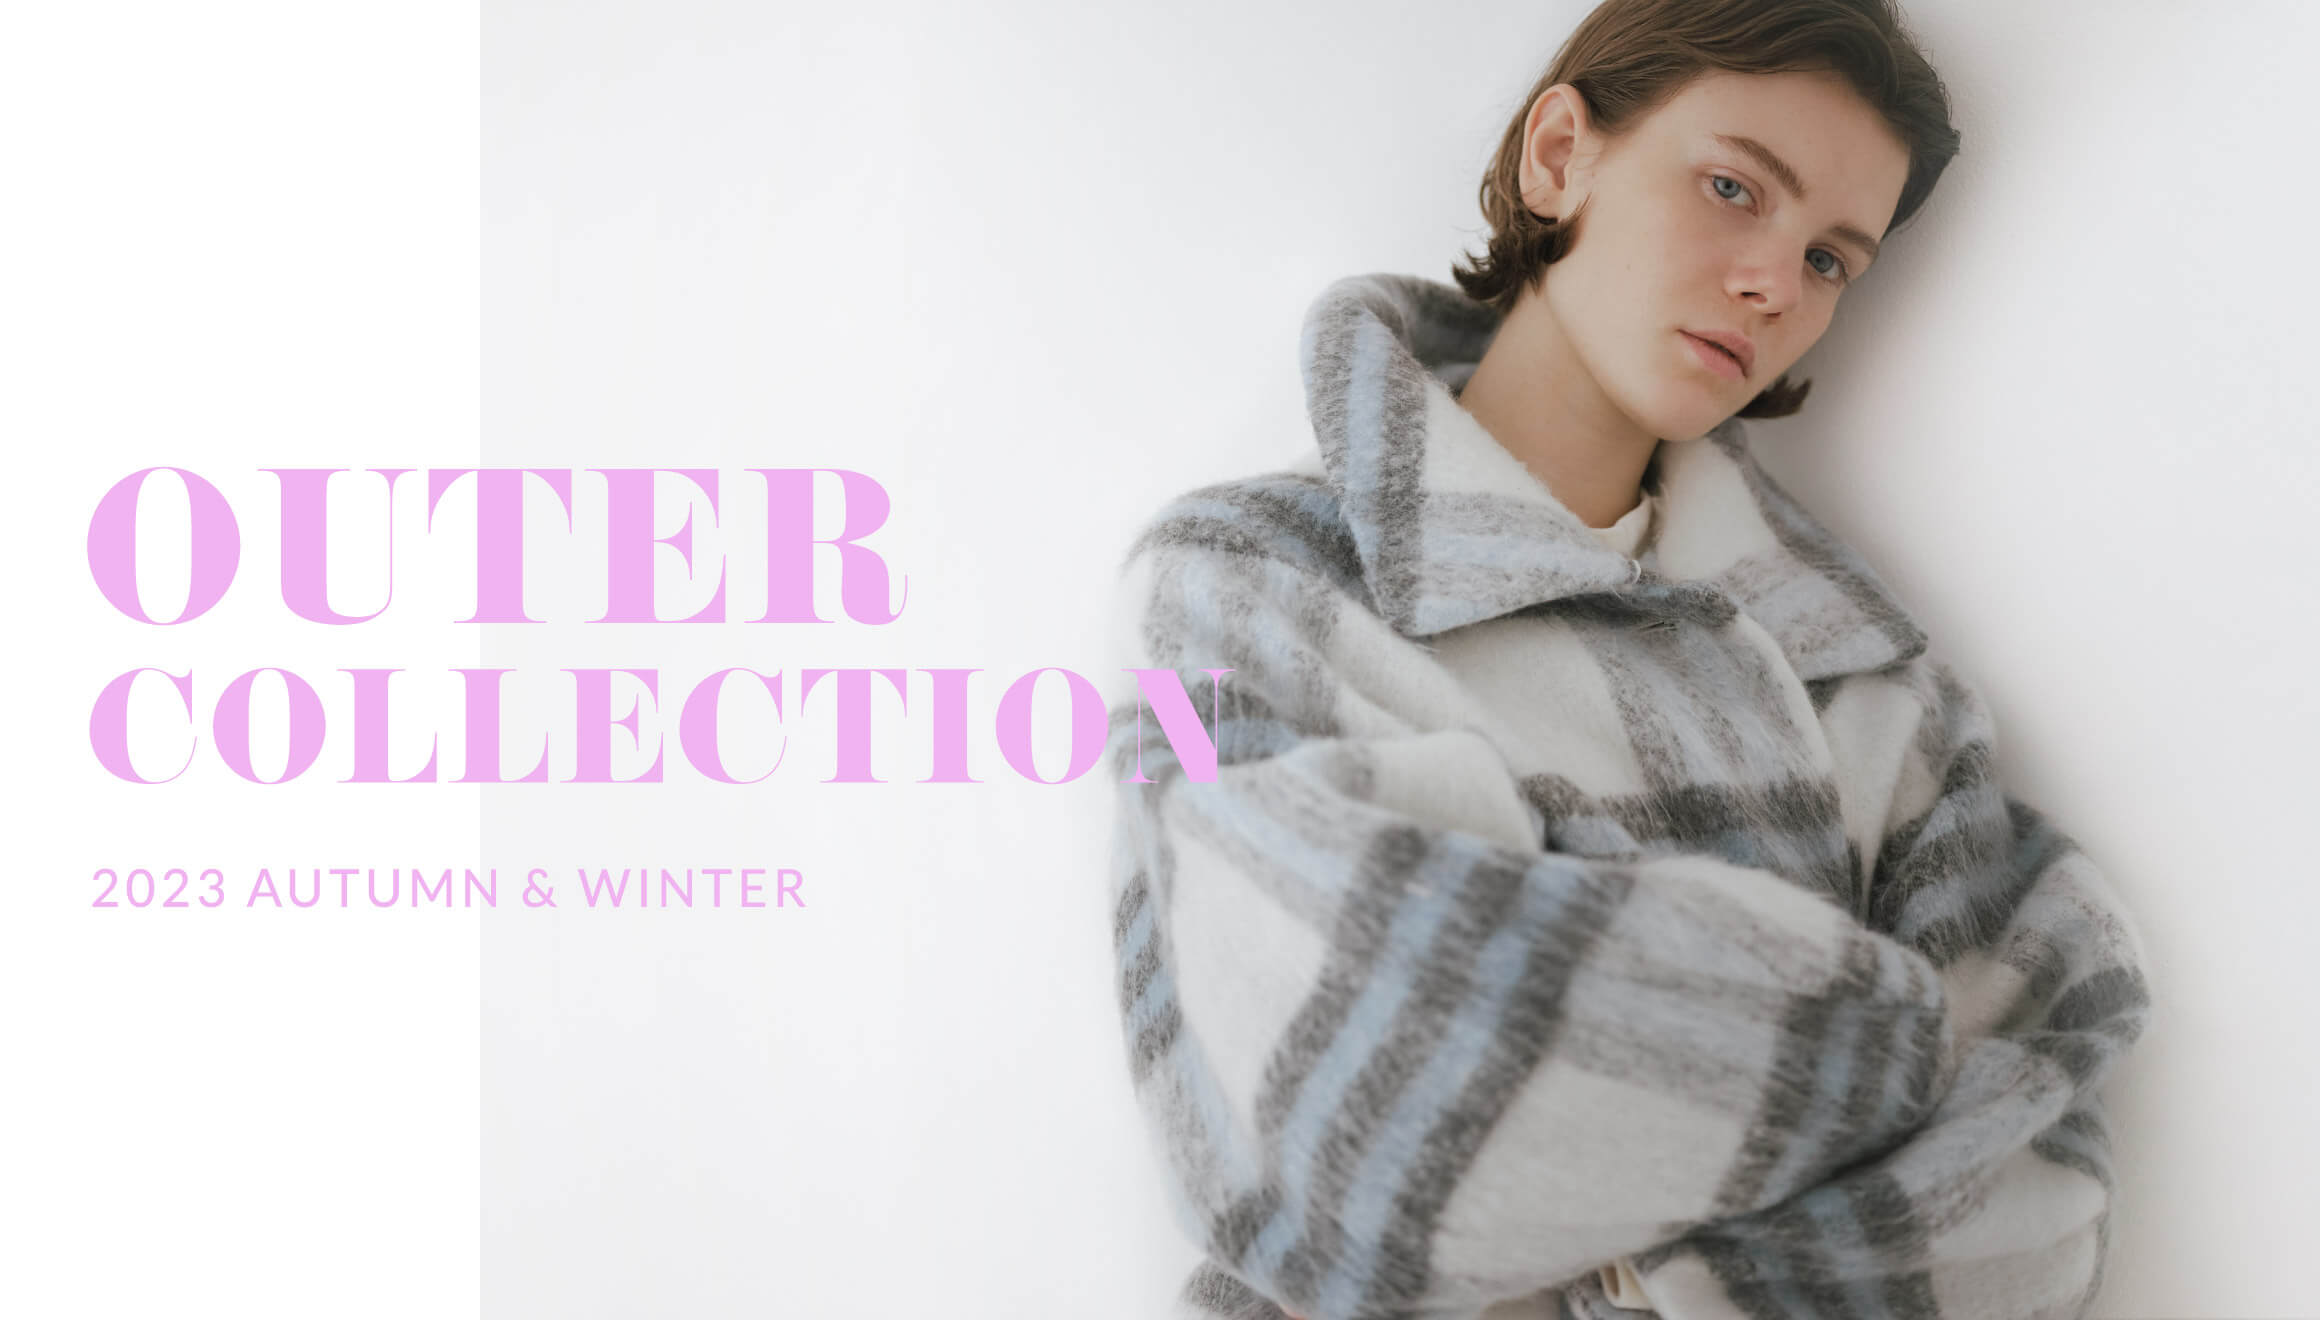 OUTER COLLECTION 2023 AUTUMN & WINTER